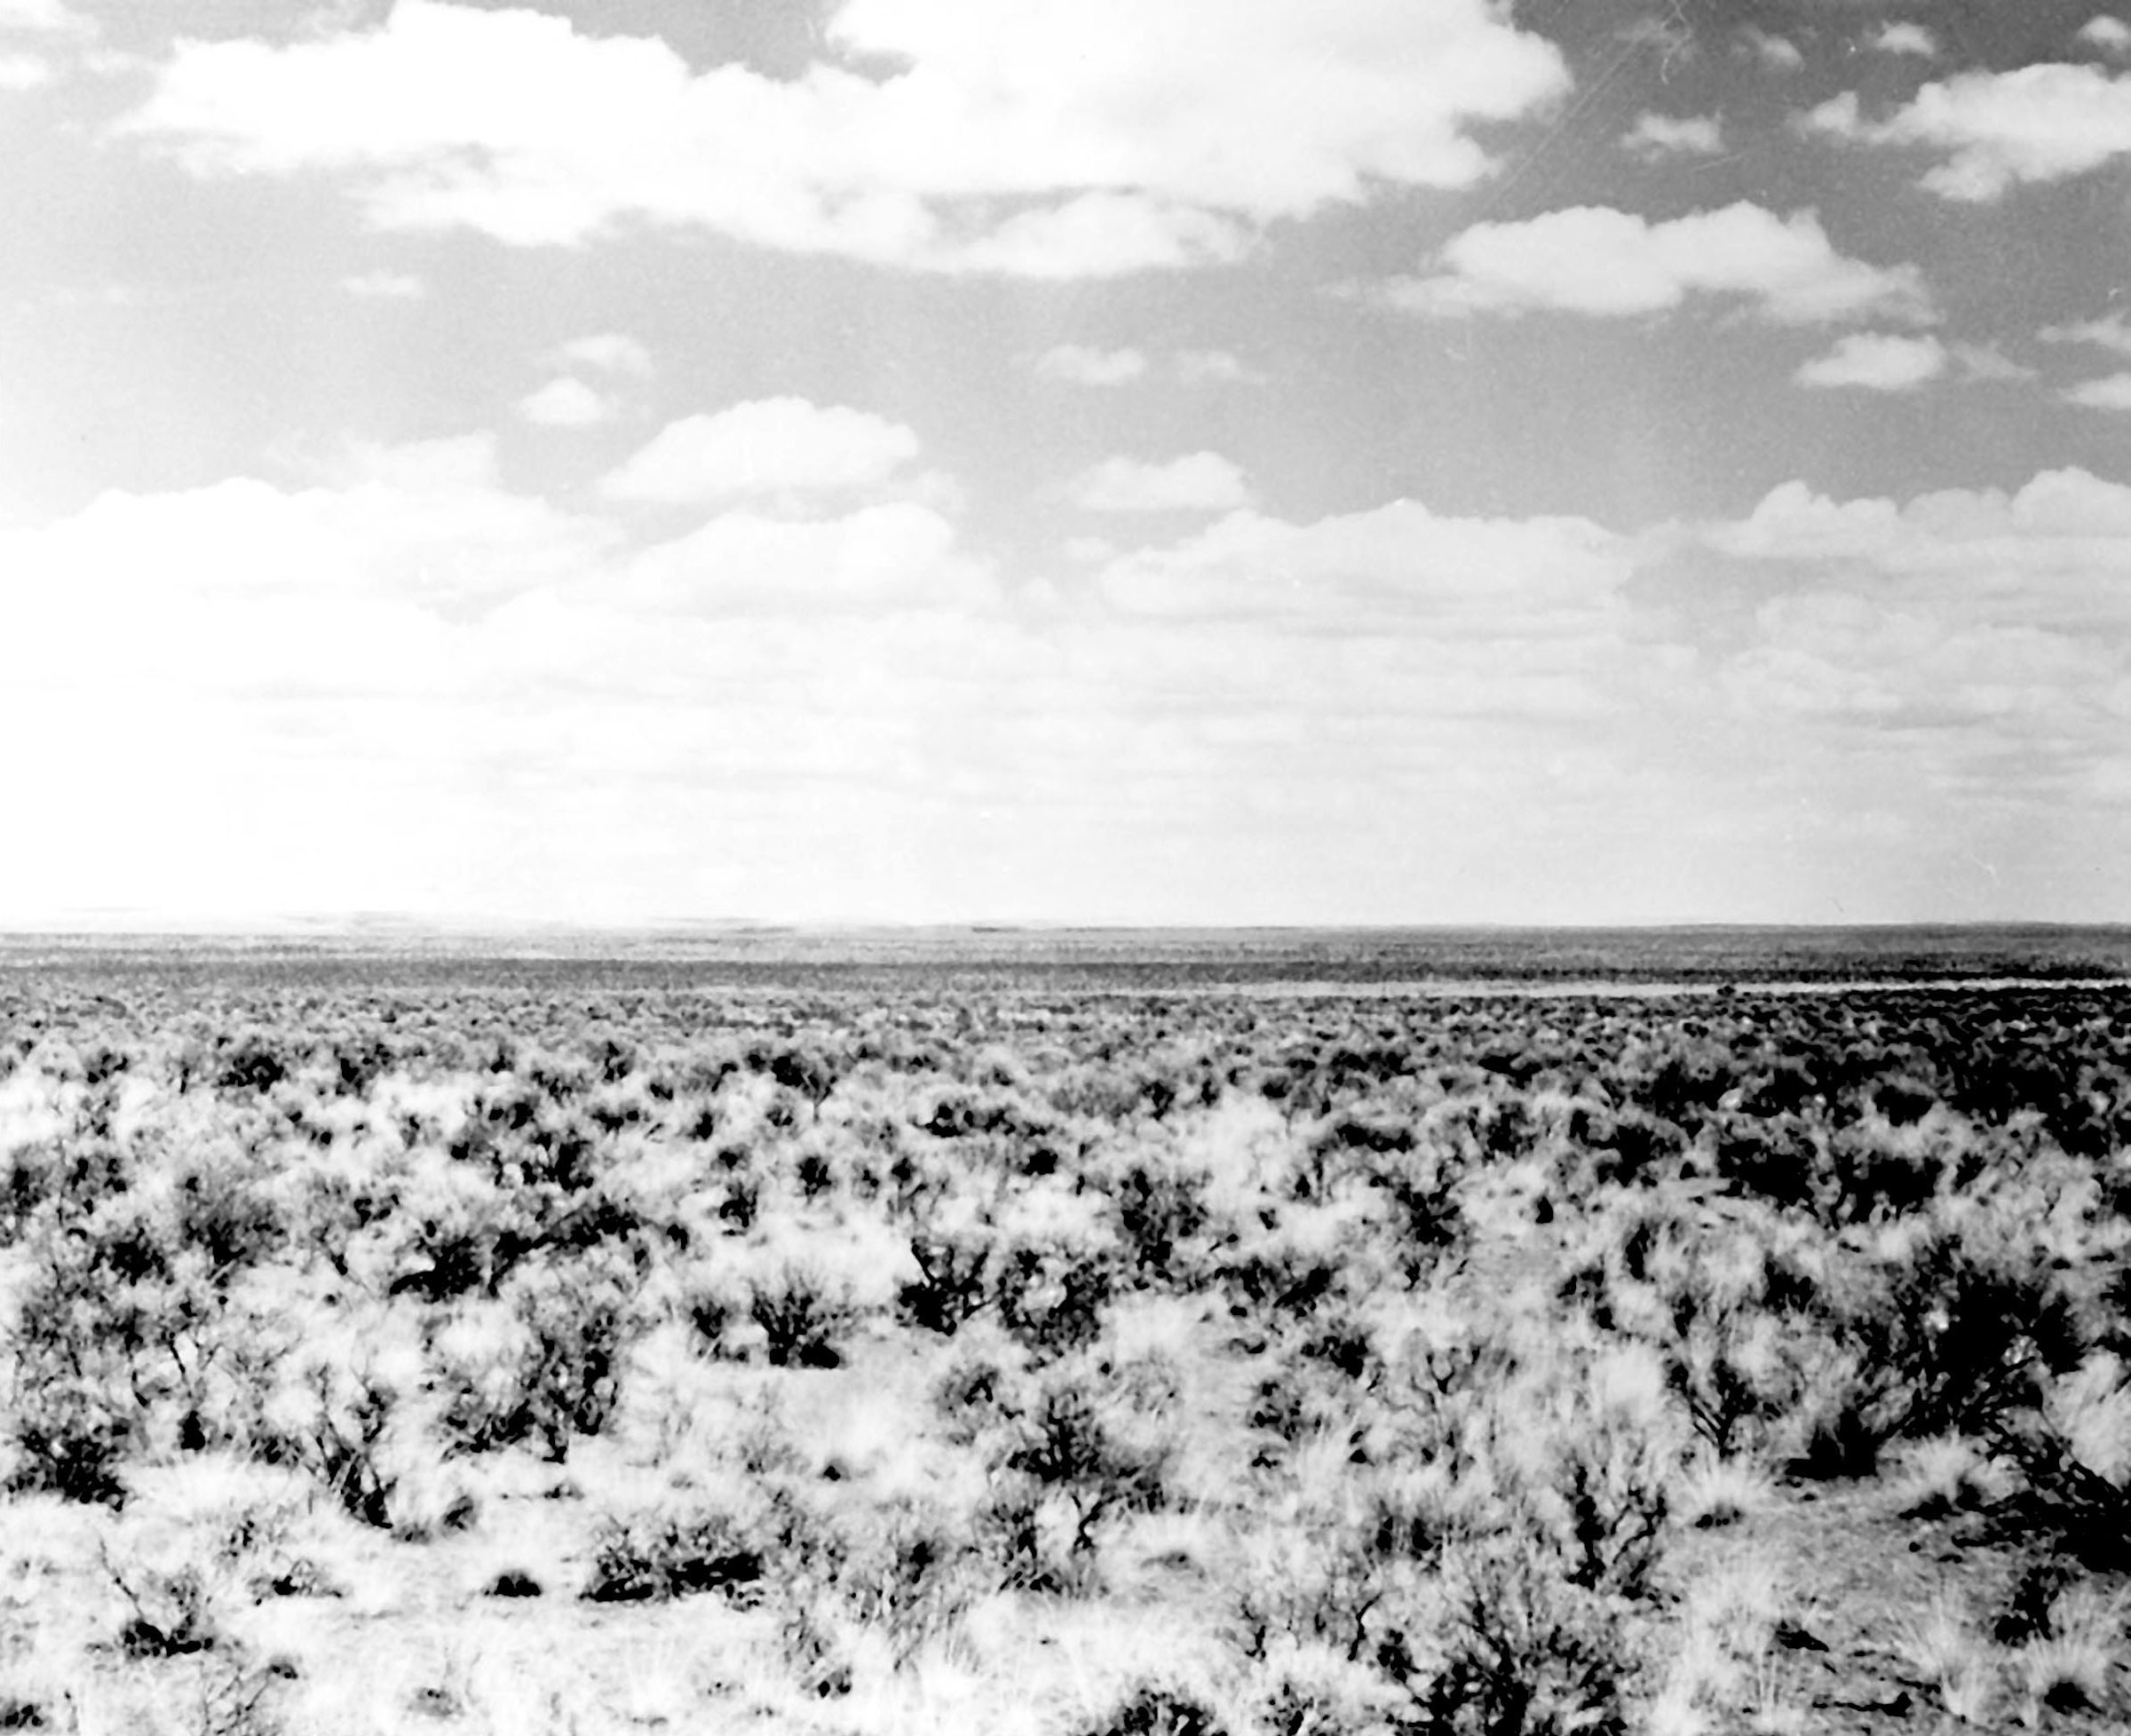 Photo taken August 15, 1944. Typical landscape near Moses Lake, WA before irrigation from Grand Coulee Dam.